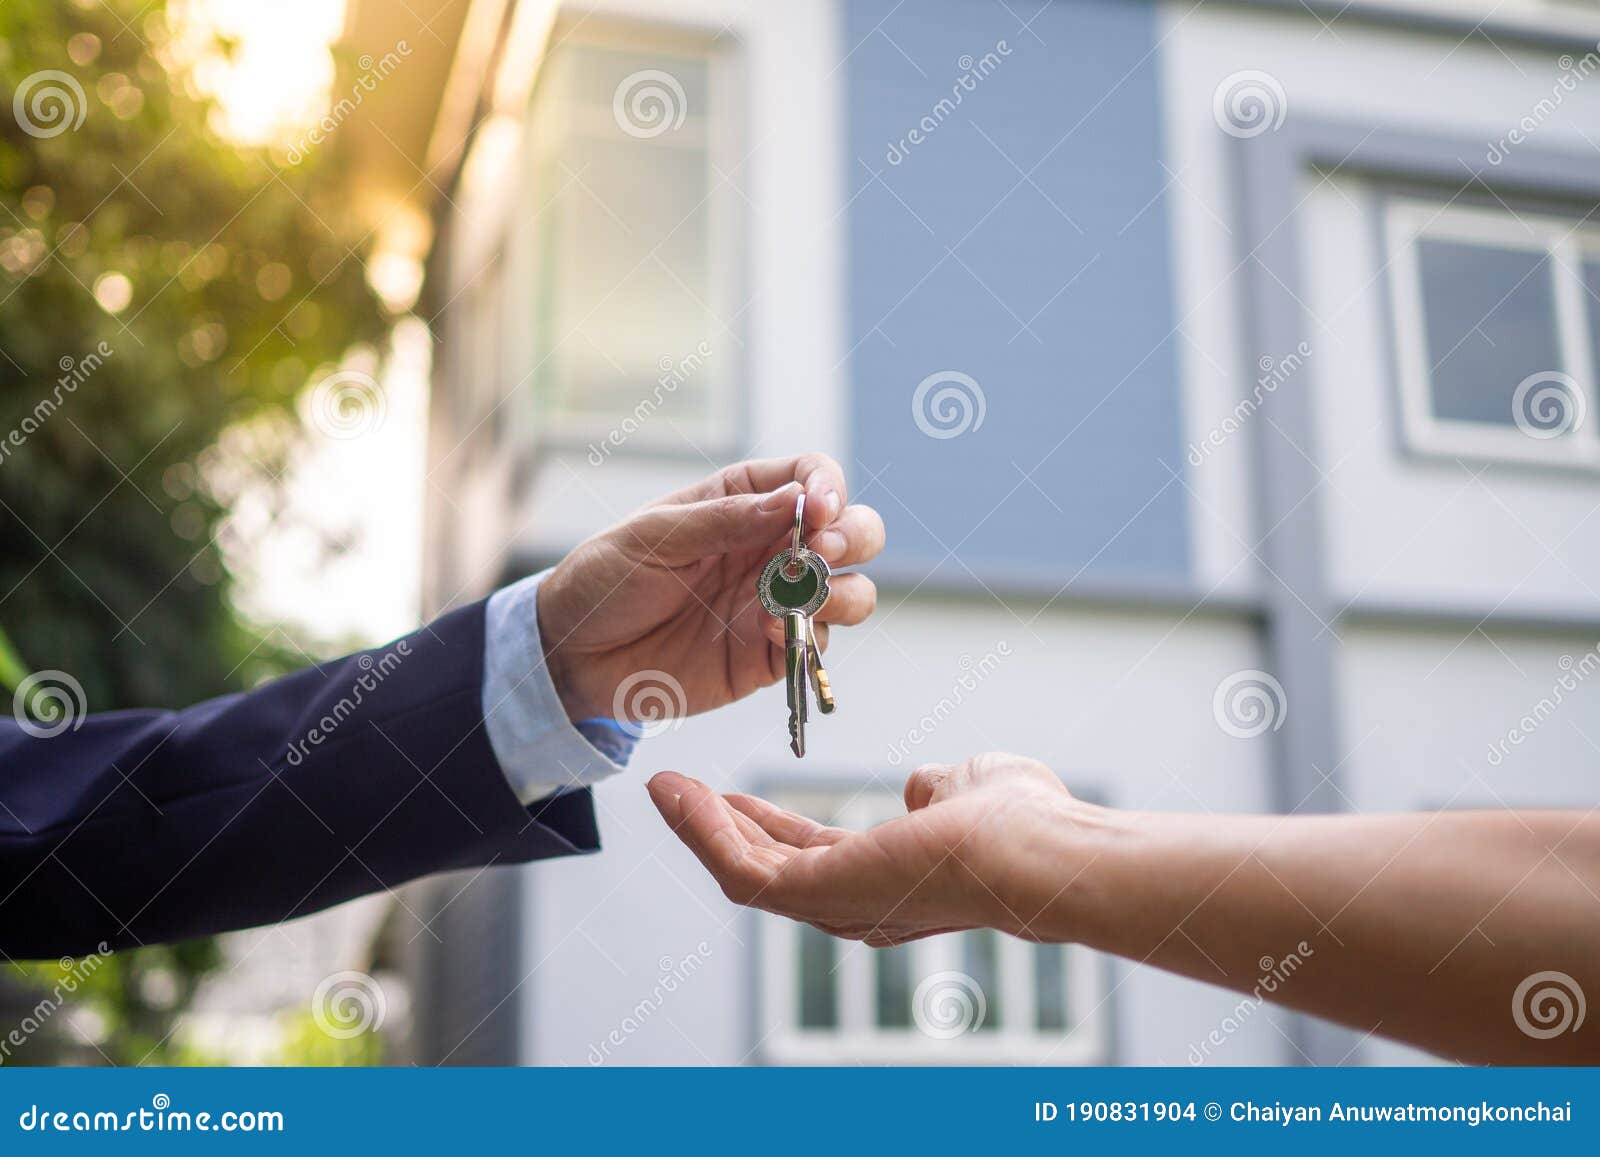 home buyers are taking home keys from sellers. sell your house, rent house and buy ideas